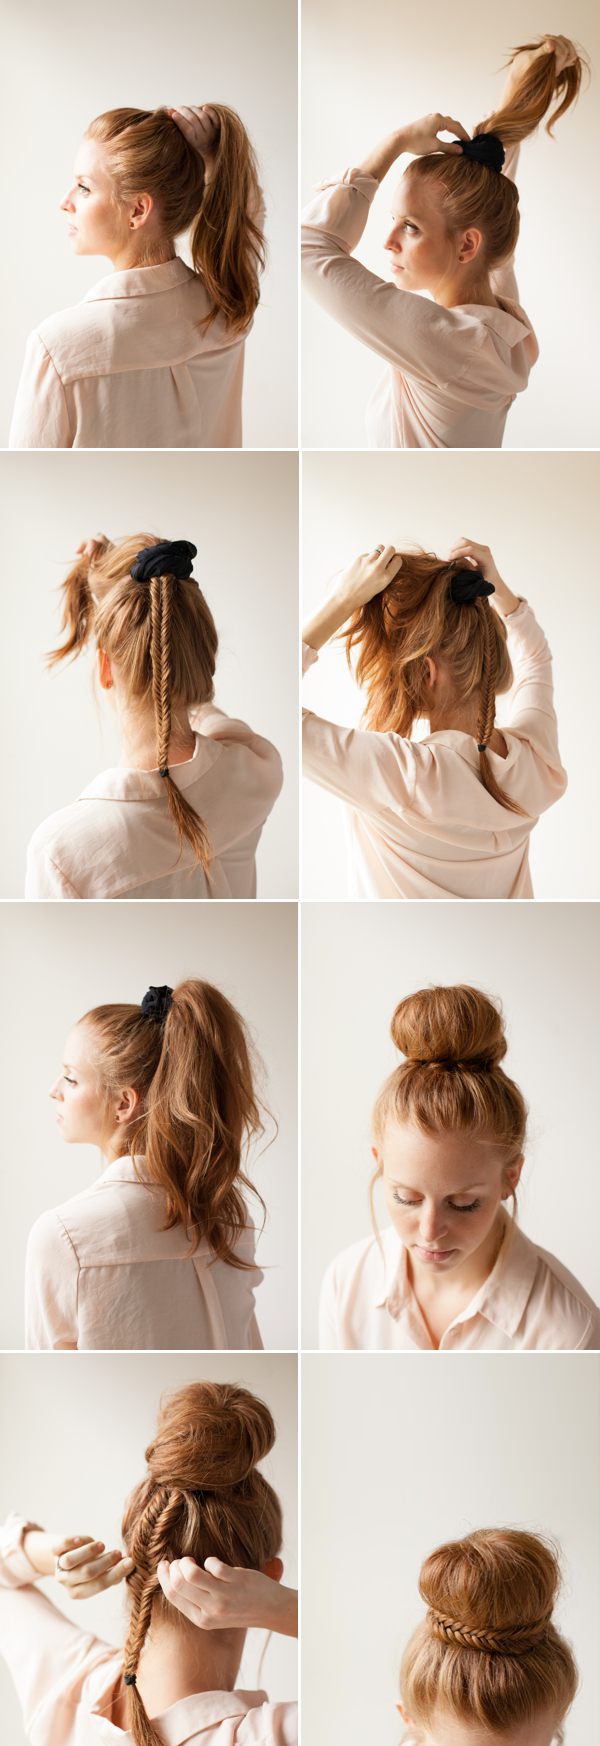 18 Easy Step by Step Tutorials for Perfect Hairstyles ...